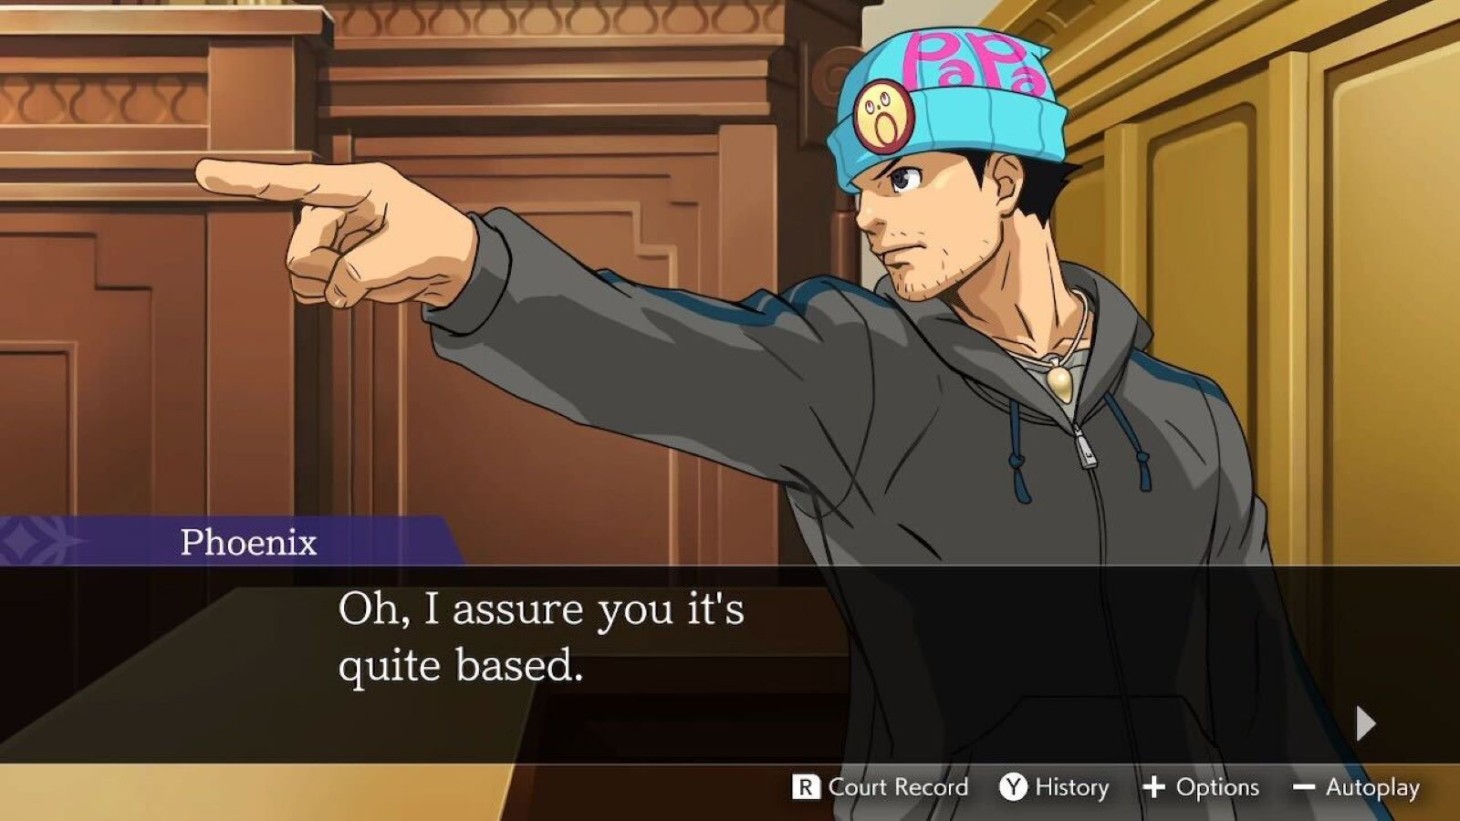 Ace Attorney Trilogy New Mobile Version Appears Worldwide